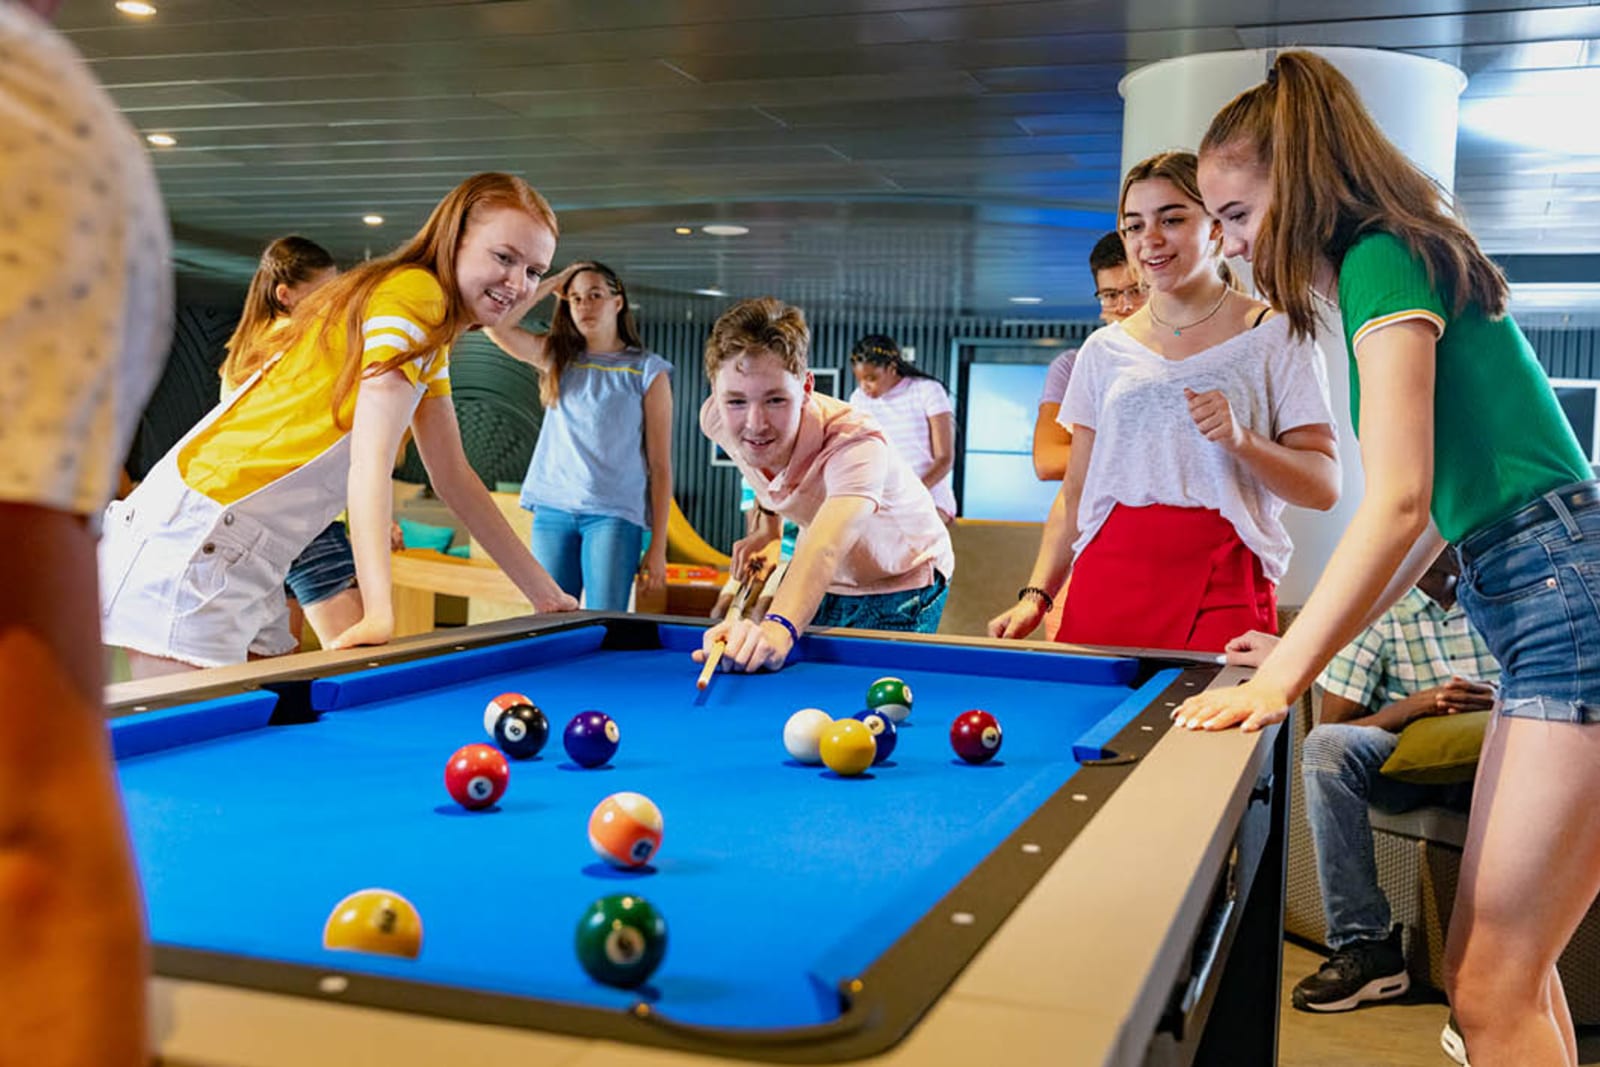 A group of teens playing pool aboard a cruise ship